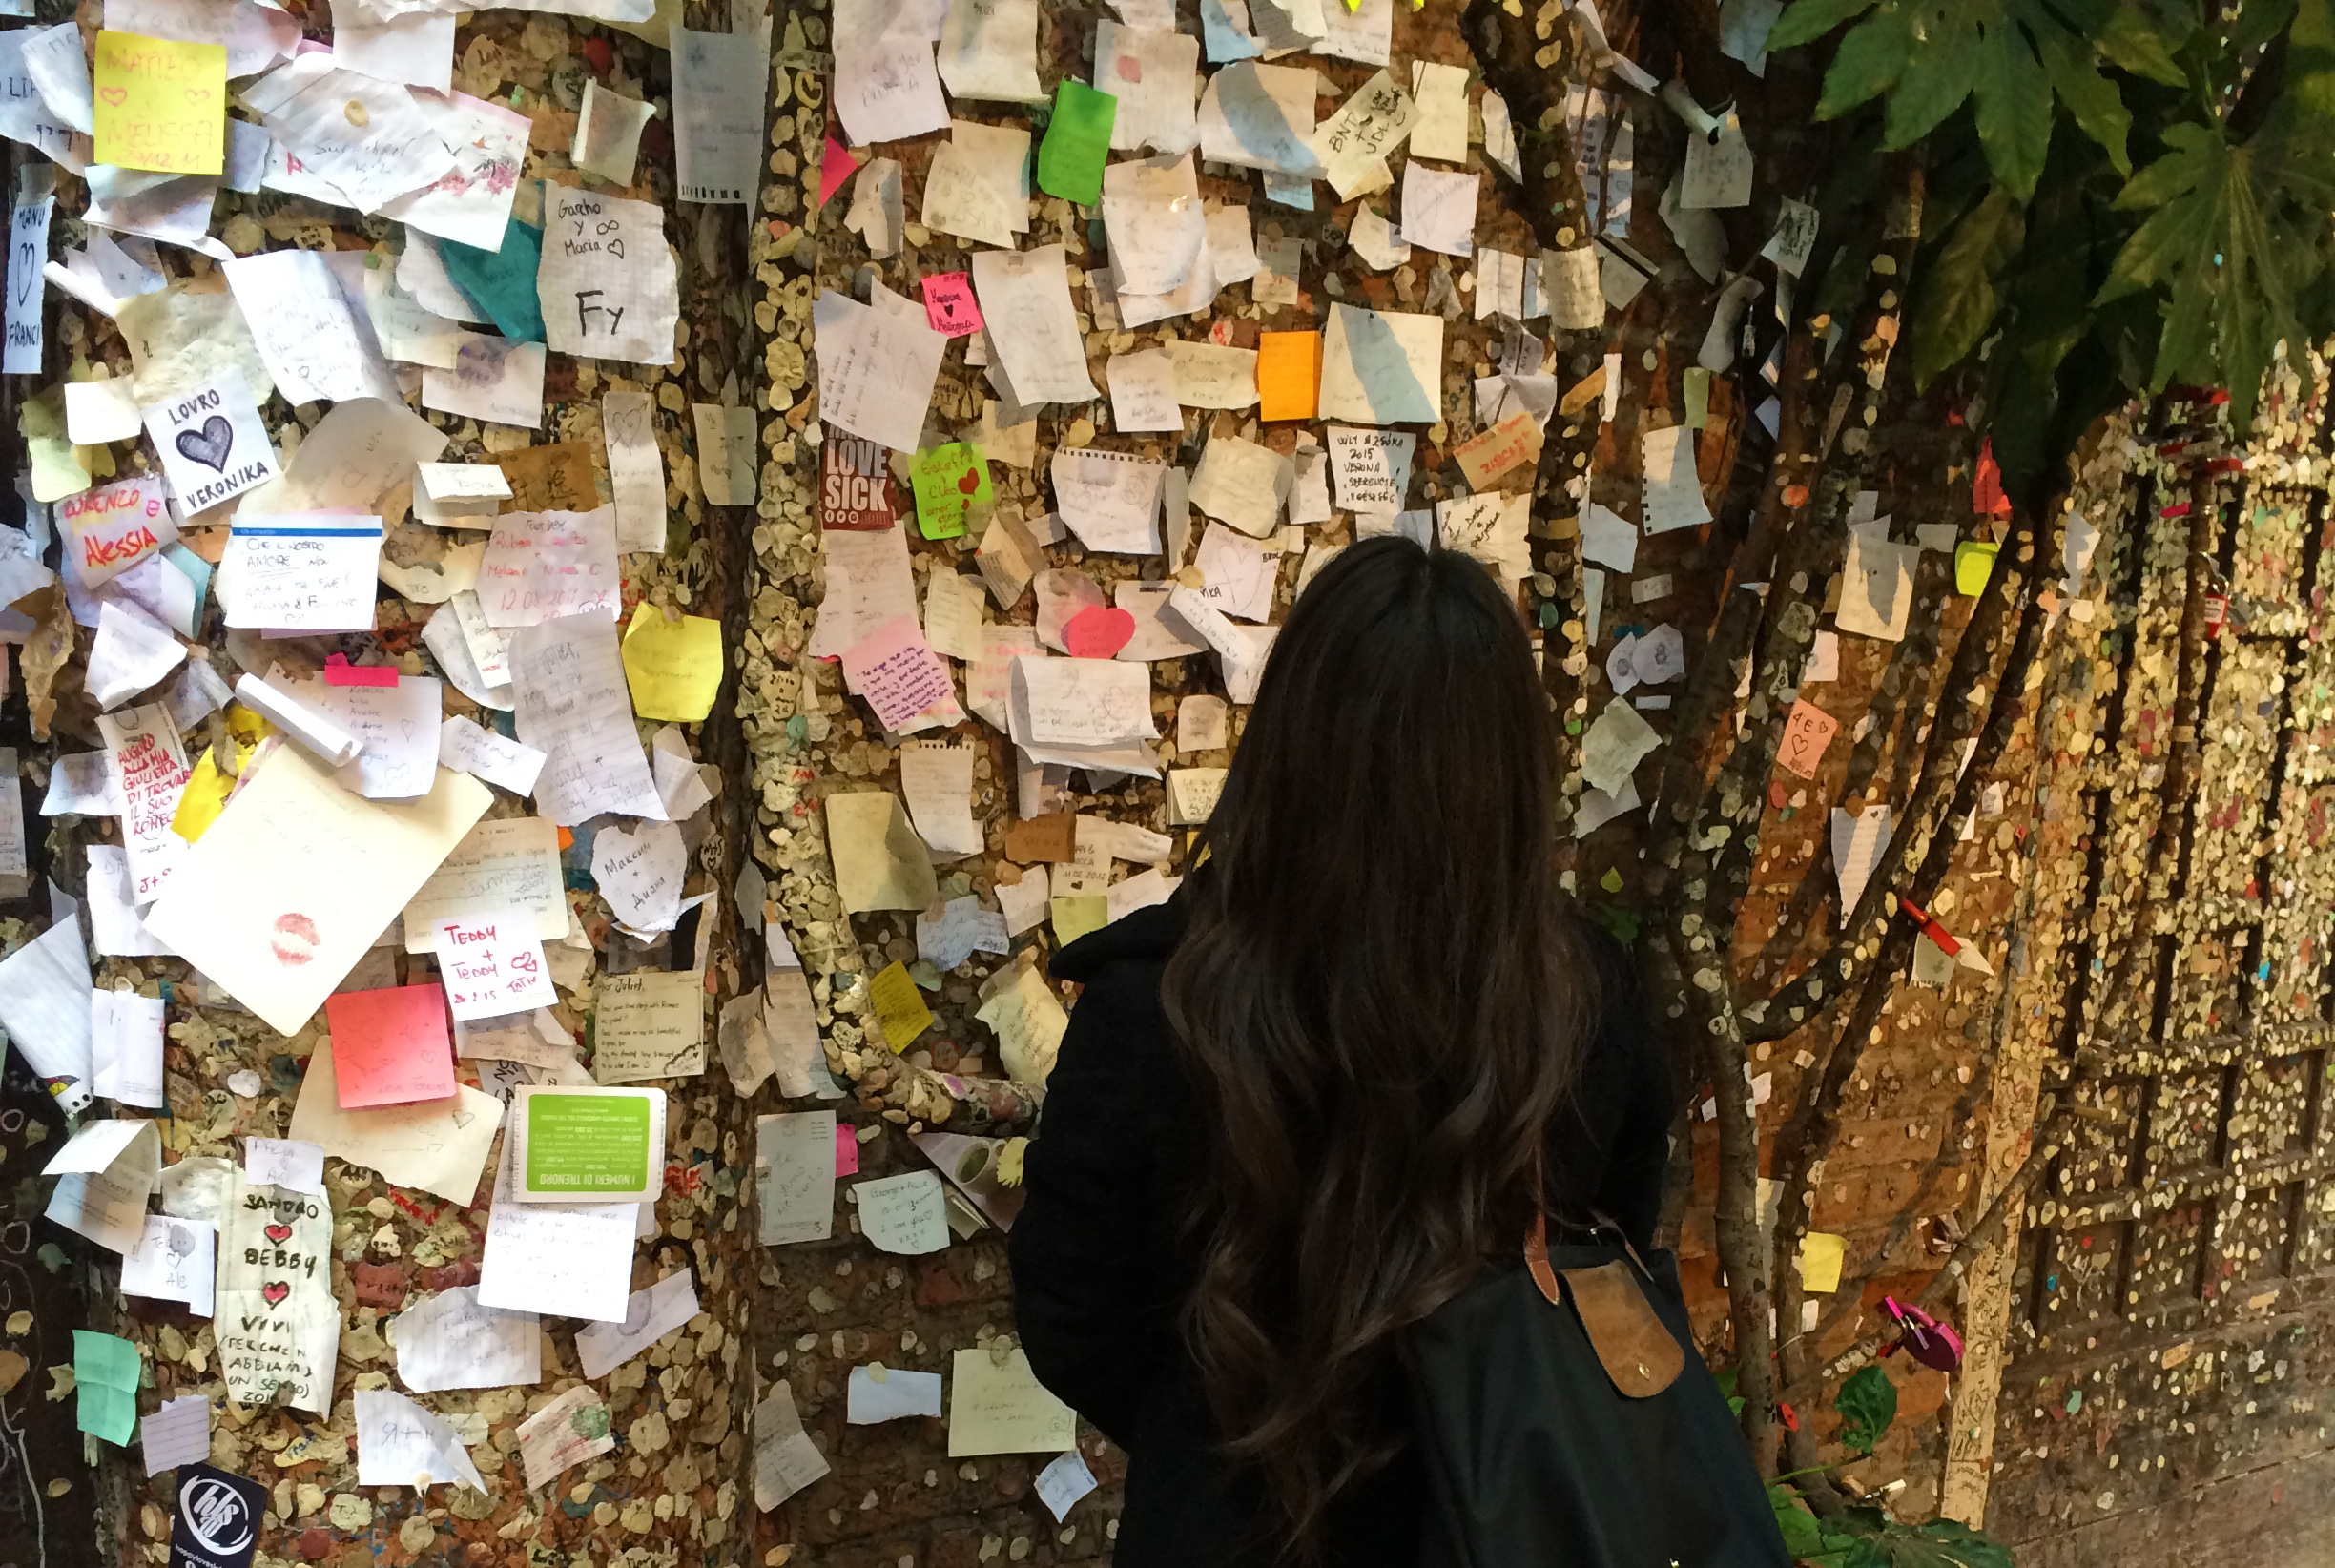 Some of the handwritten love letters to Juliet 